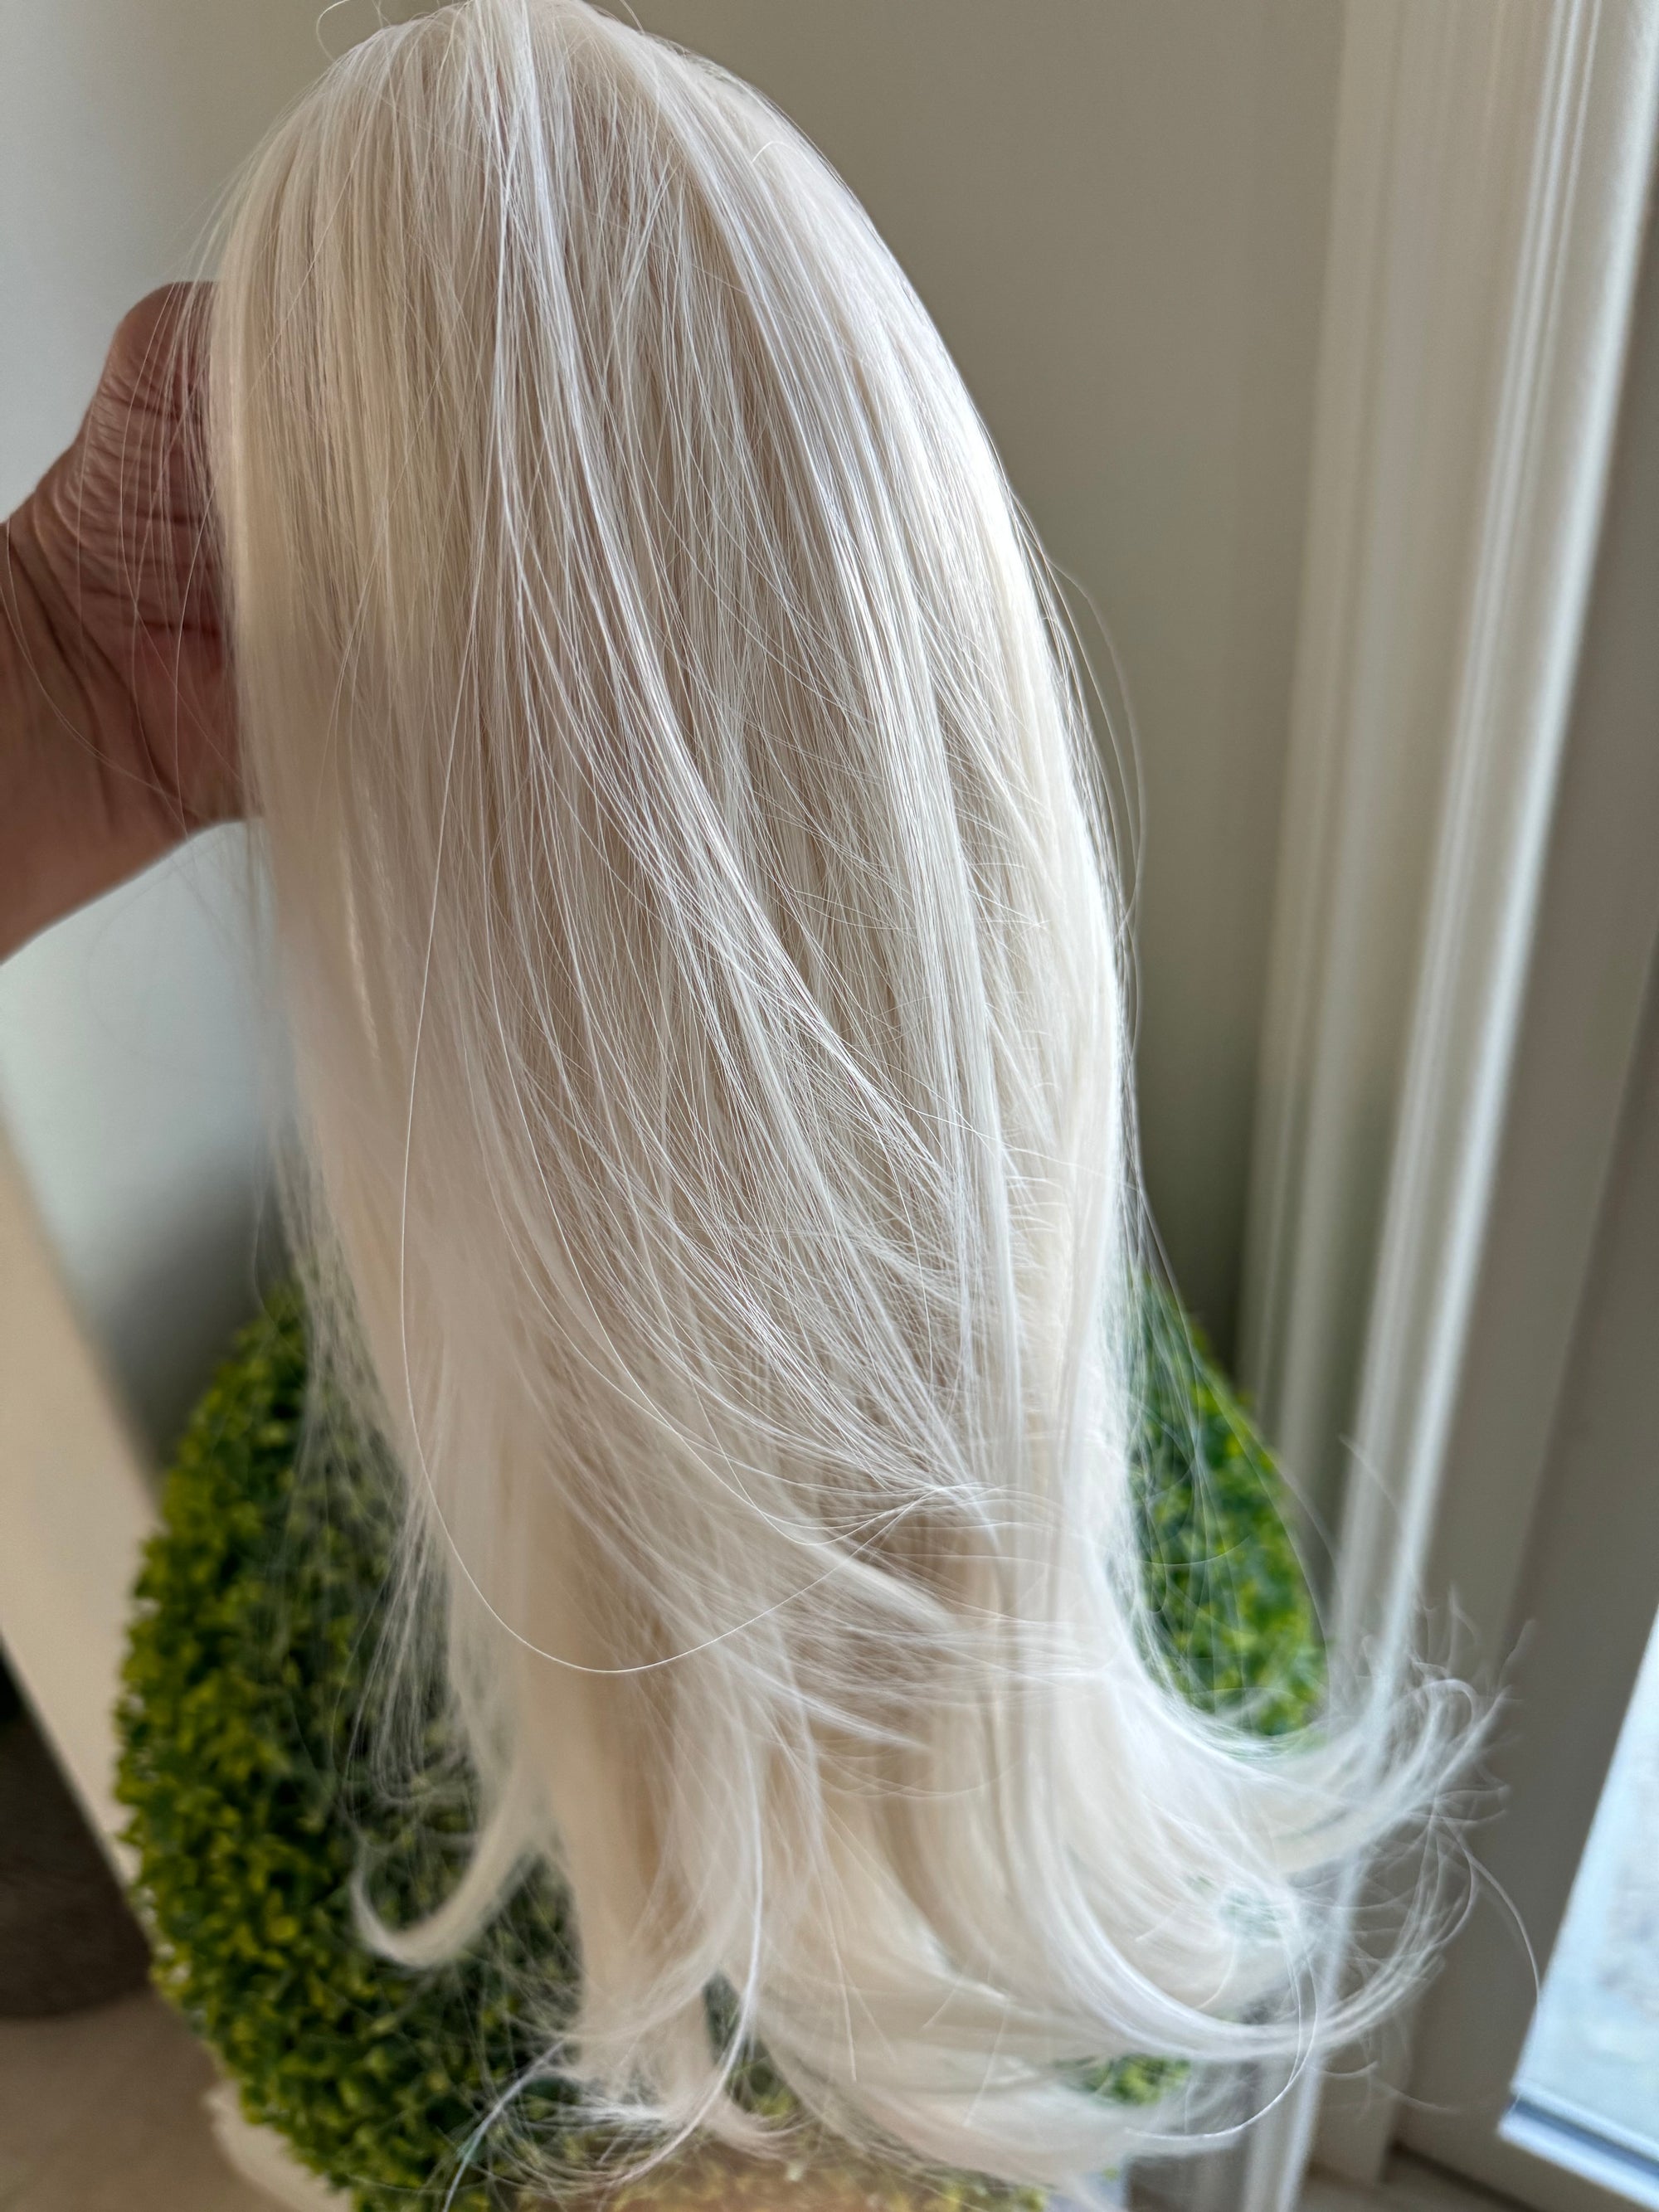 White blonde claw clip pony tail